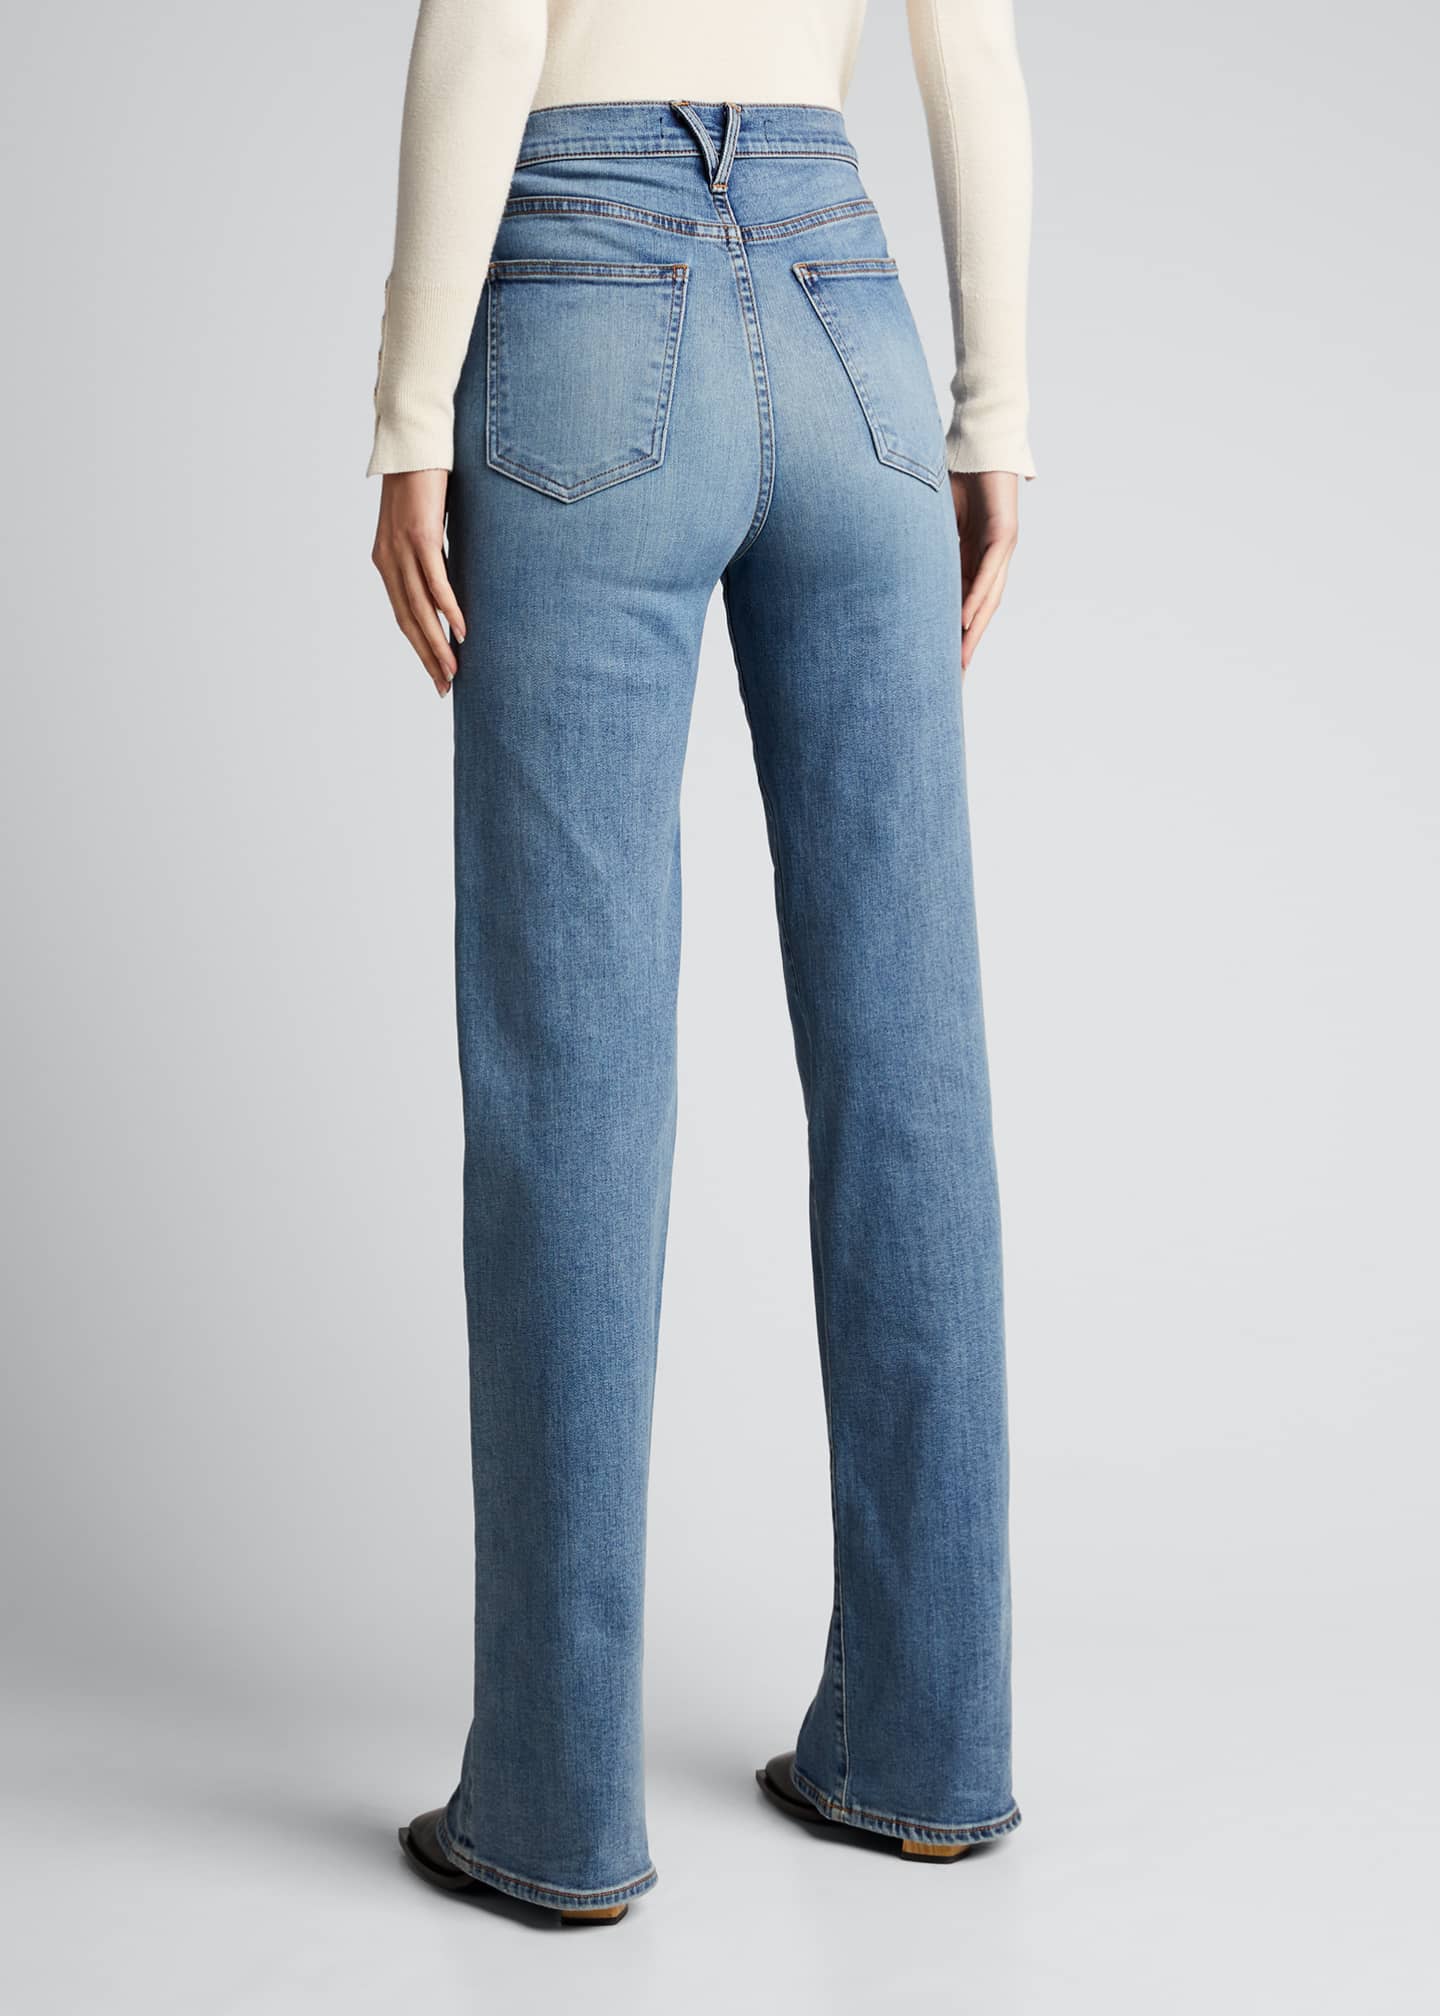 Veronica Beard Jeans Crosbie Wide-Leg Jeans with Patch Pockets ...